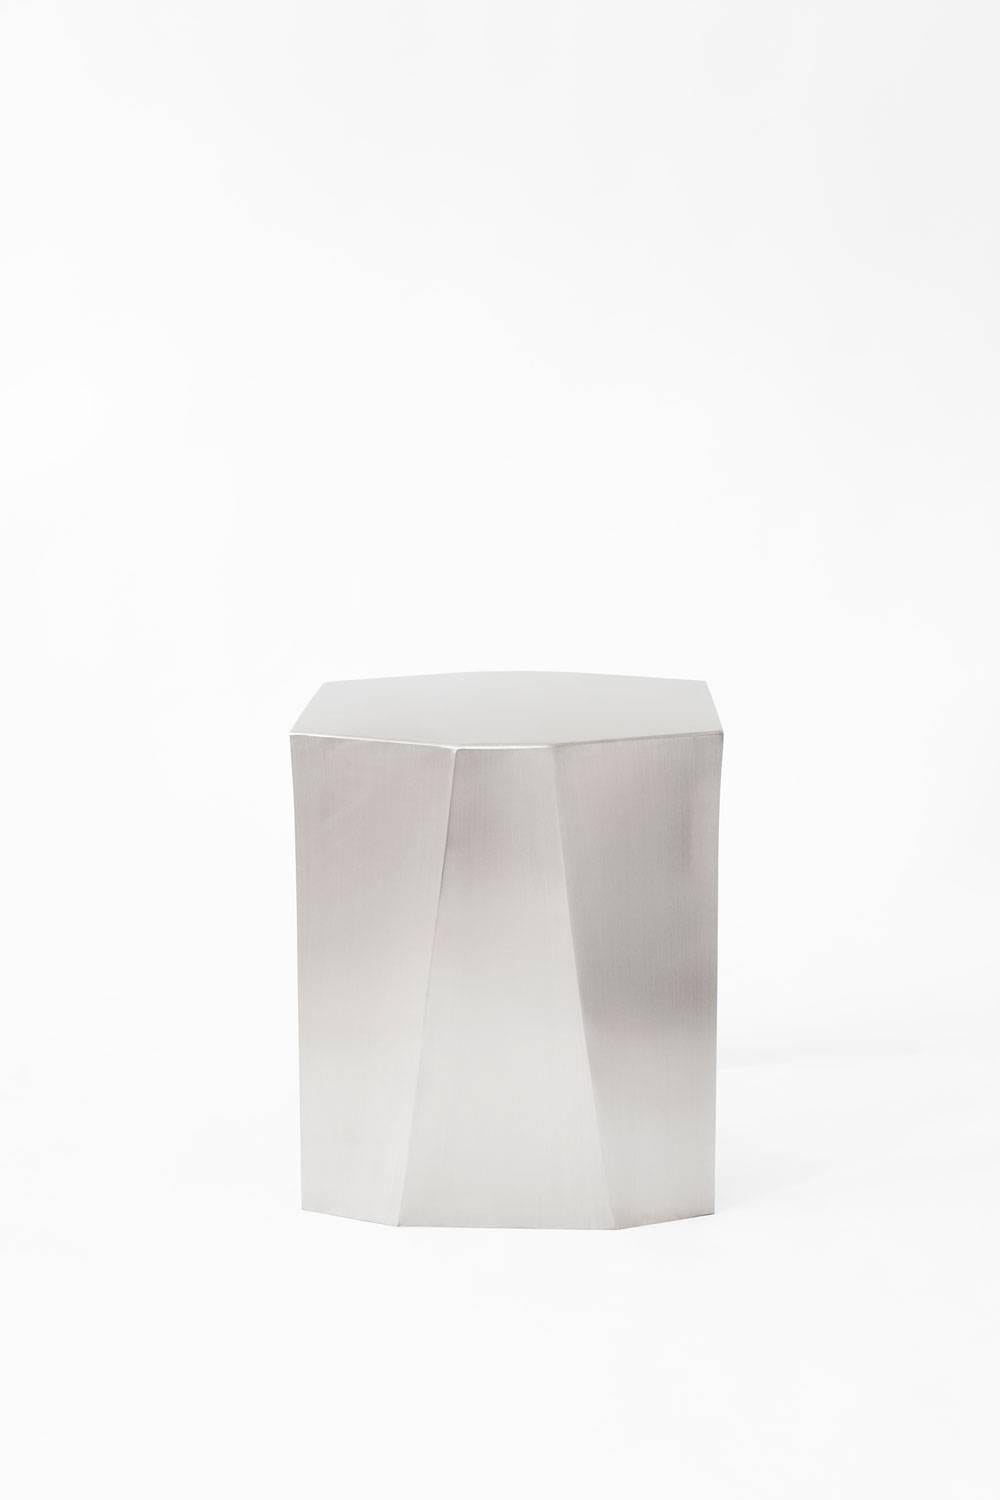 Side table designed by Adolfo Abejon.

Material: stainless steel.

Dimensions: 45 × 40 × 45 cm (L × W × H). 

Katy is a side table, but, above all, it's a feeling for sculpture handmade in a stainless steel sheet. Katy is born performing